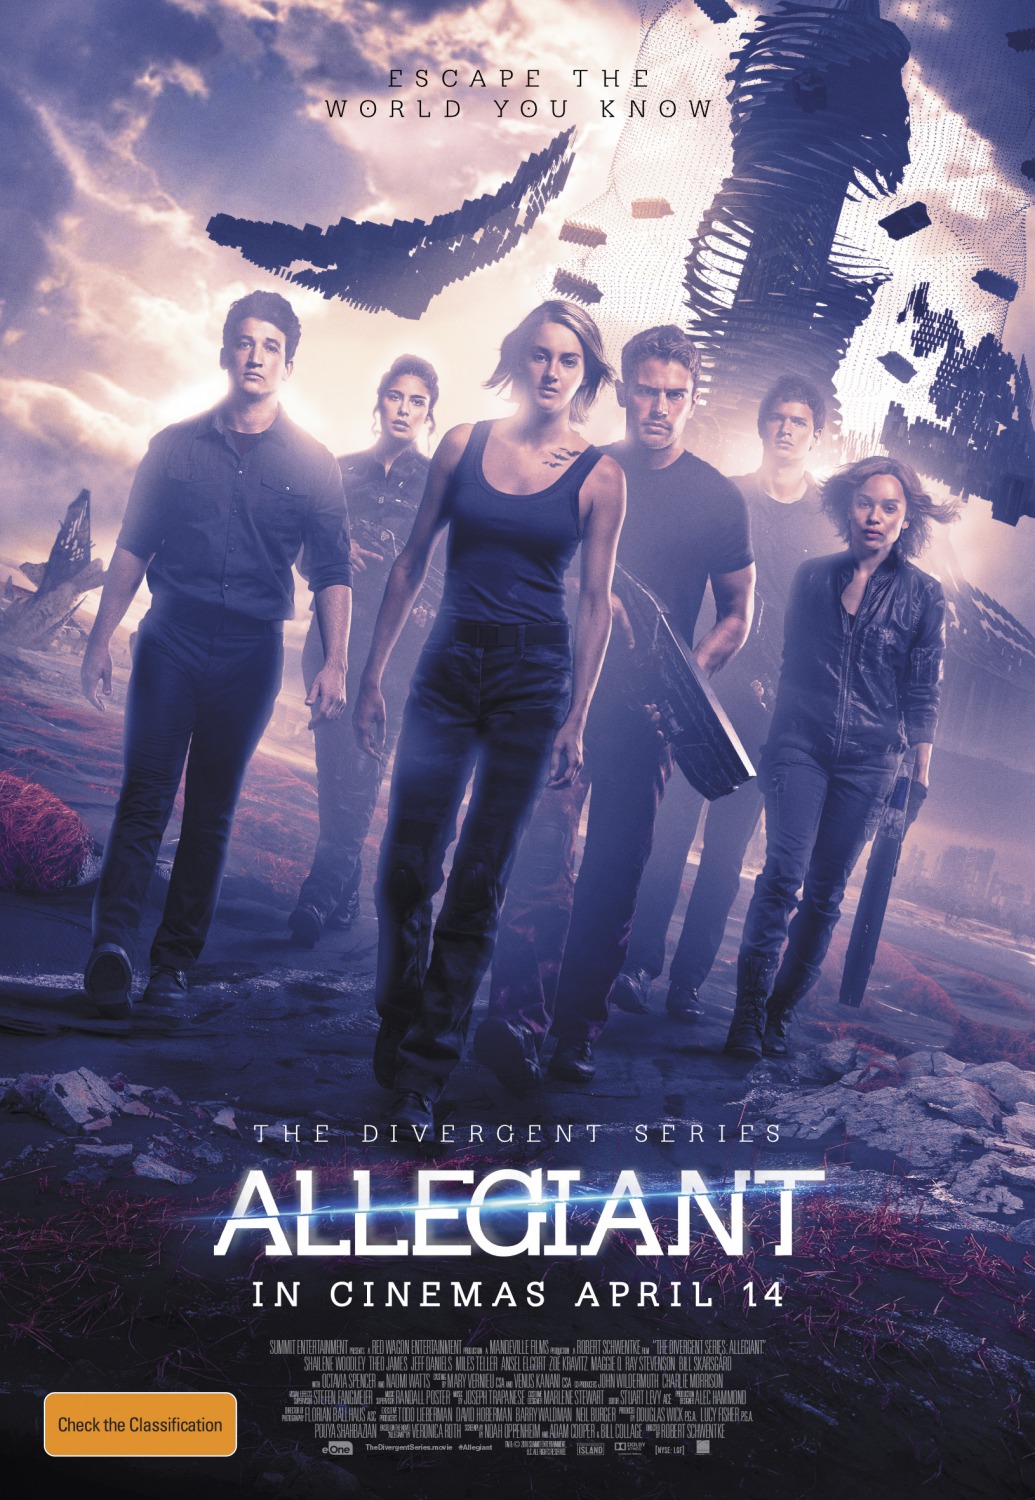 Extra Large Movie Poster Image for The Divergent Series: Allegiant (#17 of 20)